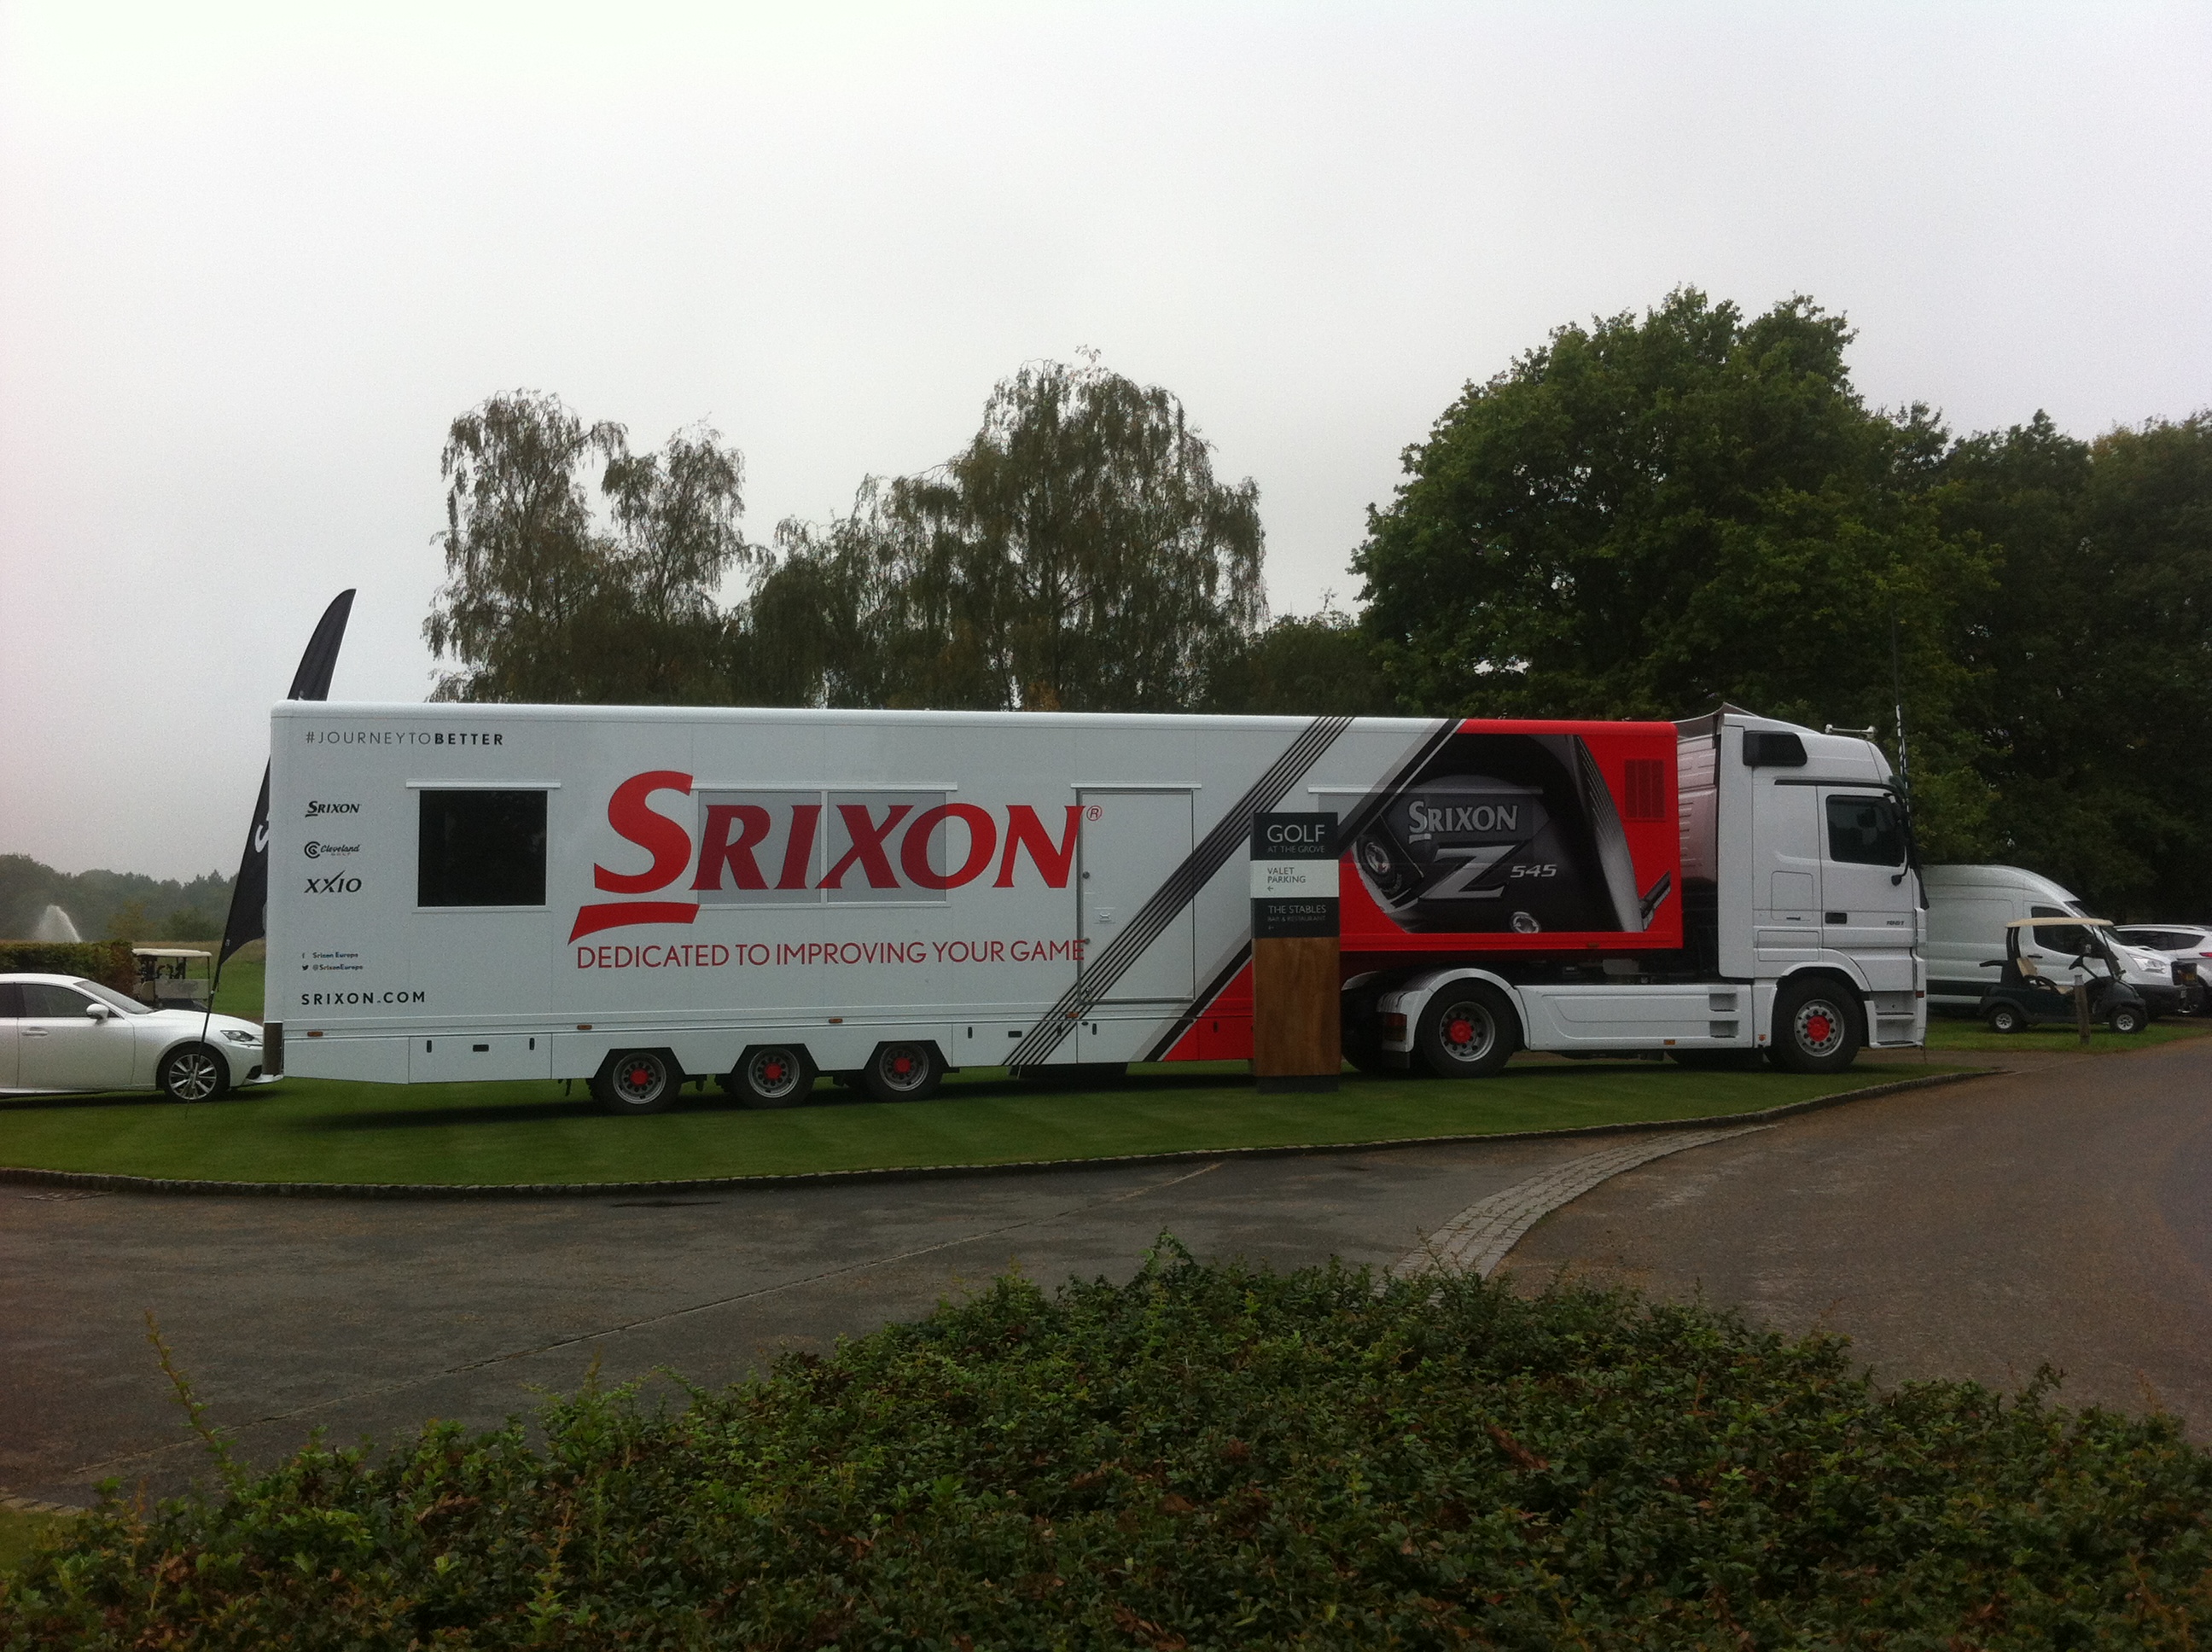 Srixon Tour van was on show for the media 